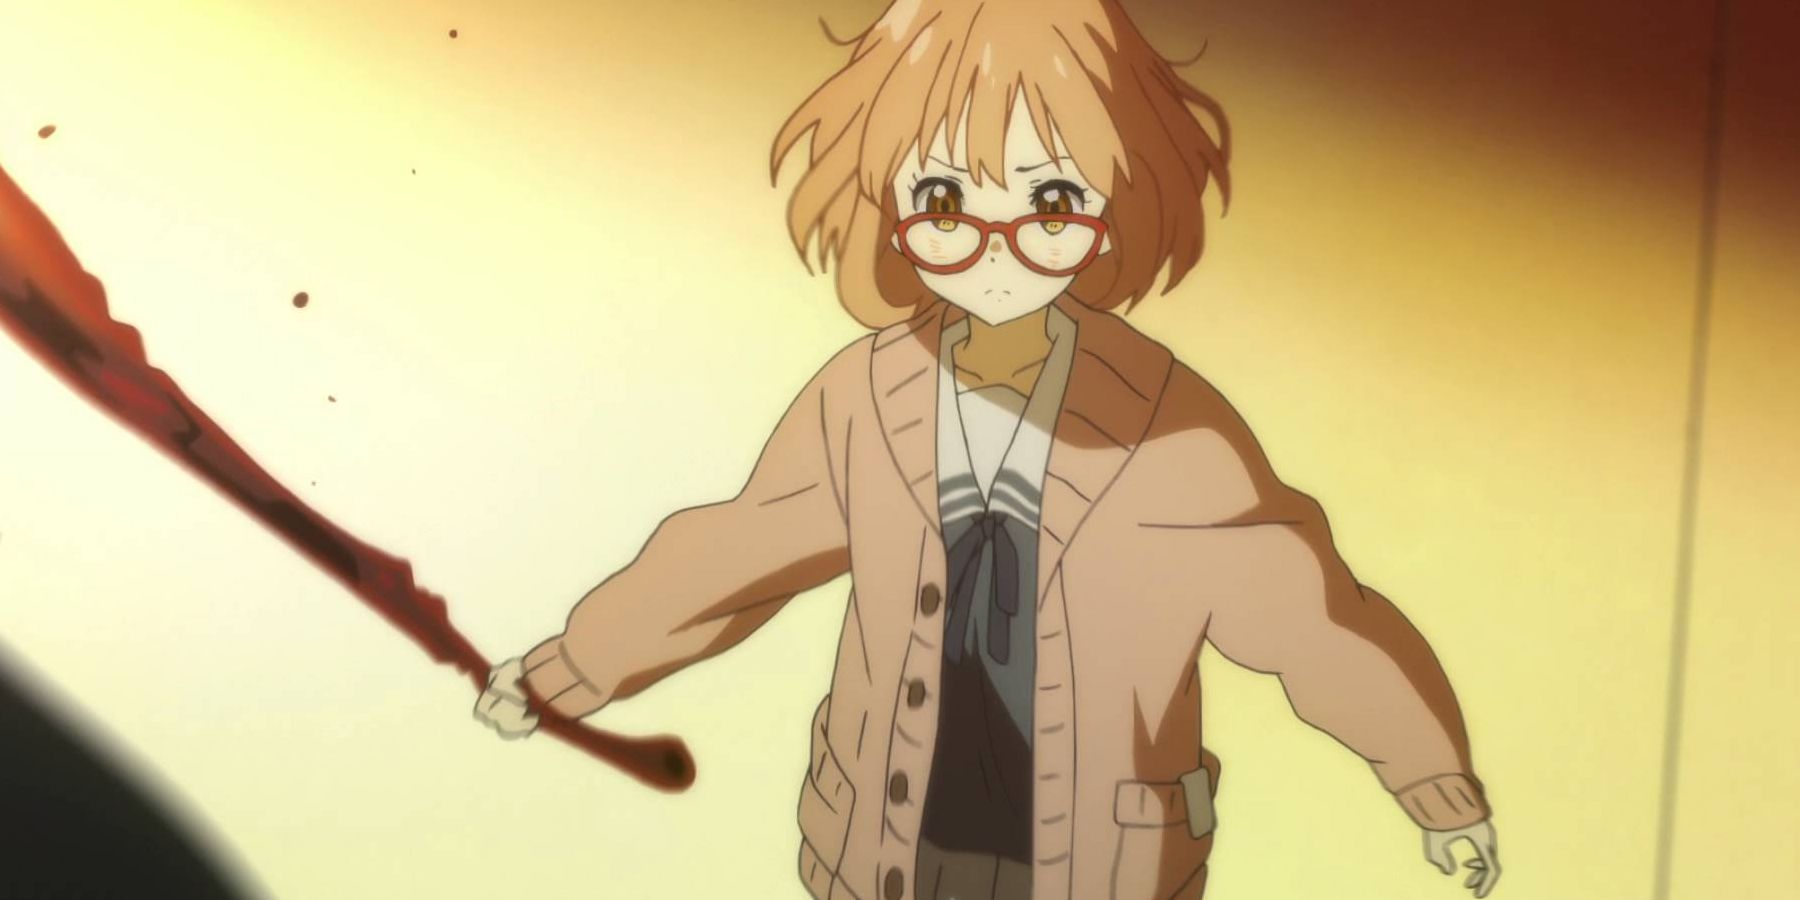 Beyond The Boundary anime Mirai ready for fight